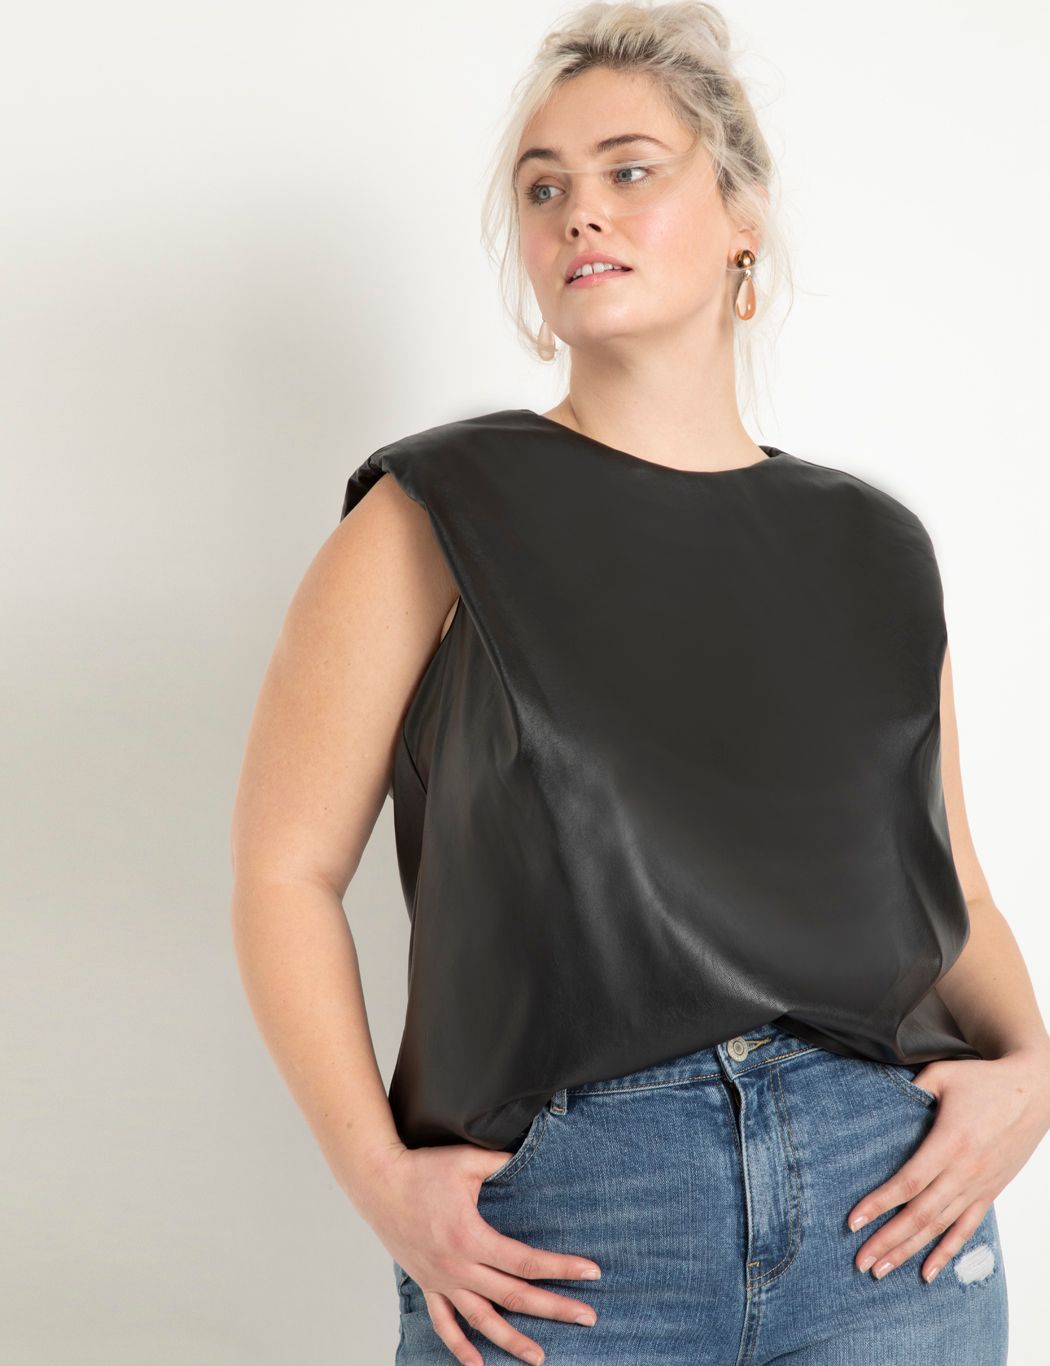 Faux Leather Strong Shoulder Tee | Women's Plus Size Tops | ELOQUII | Eloquii